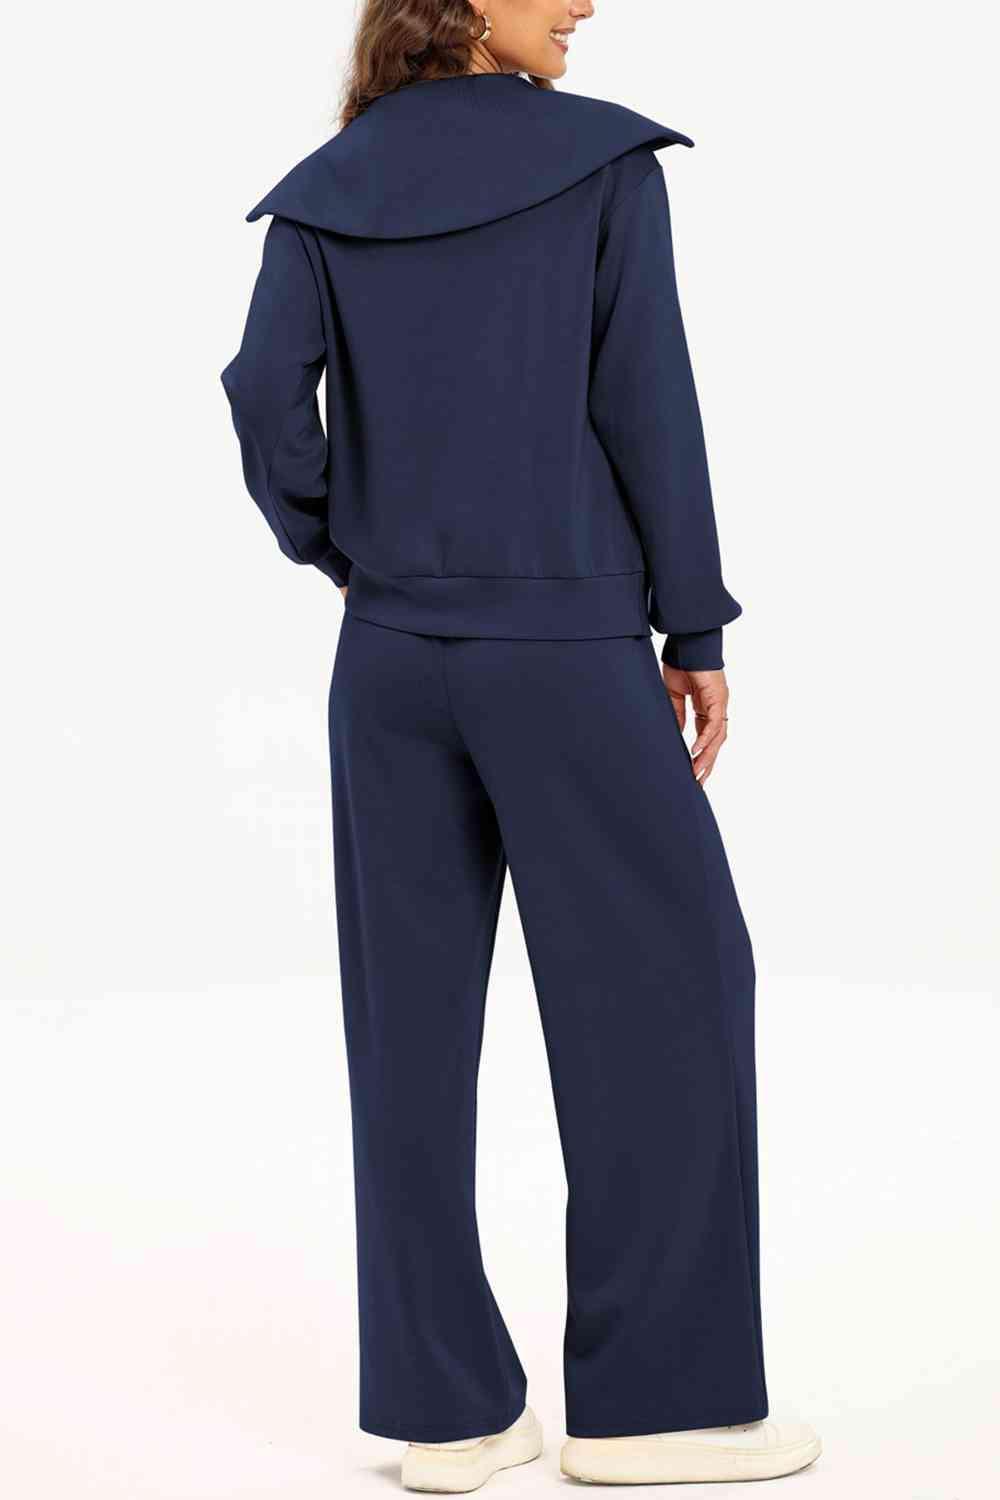 a woman wearing a blue jumpsuit with a hoodie